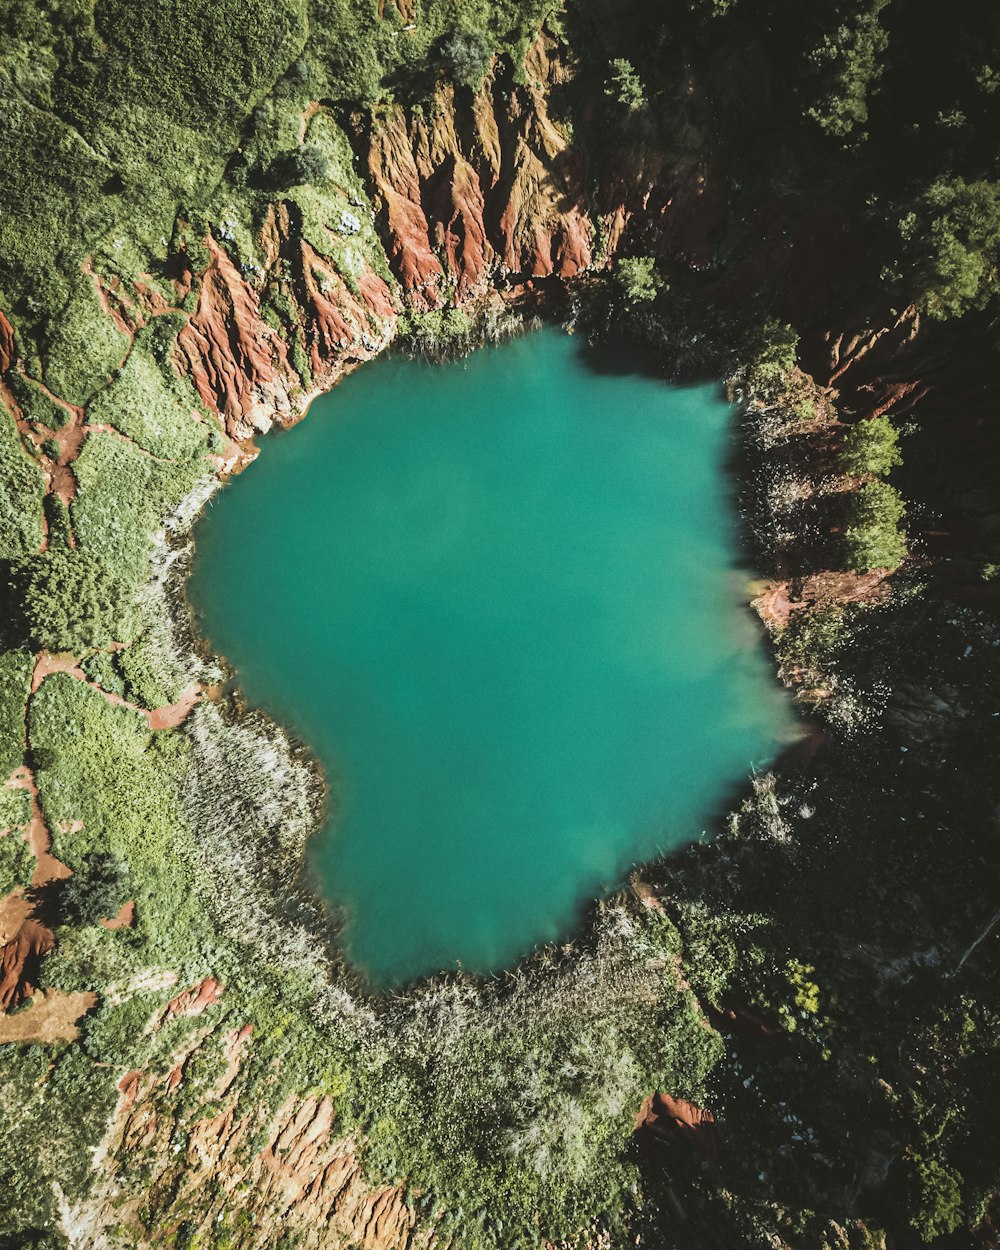 a blue lake surrounded by trees and rocks